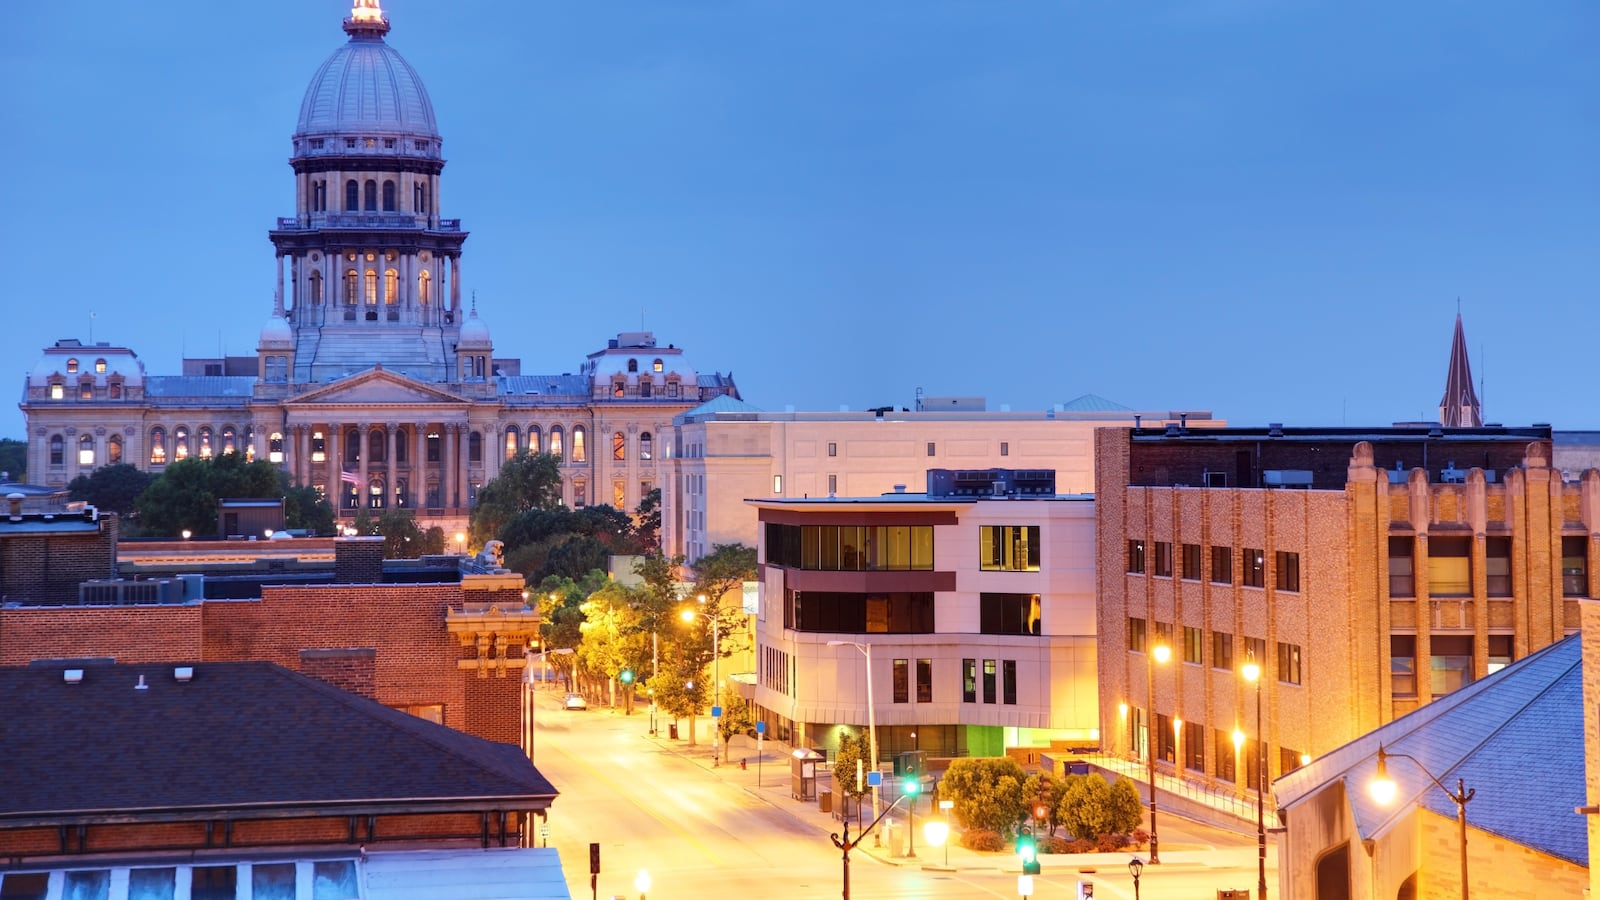 The Illinois State Capitol is seen along with other buildings and a street illuminated during the early evening.